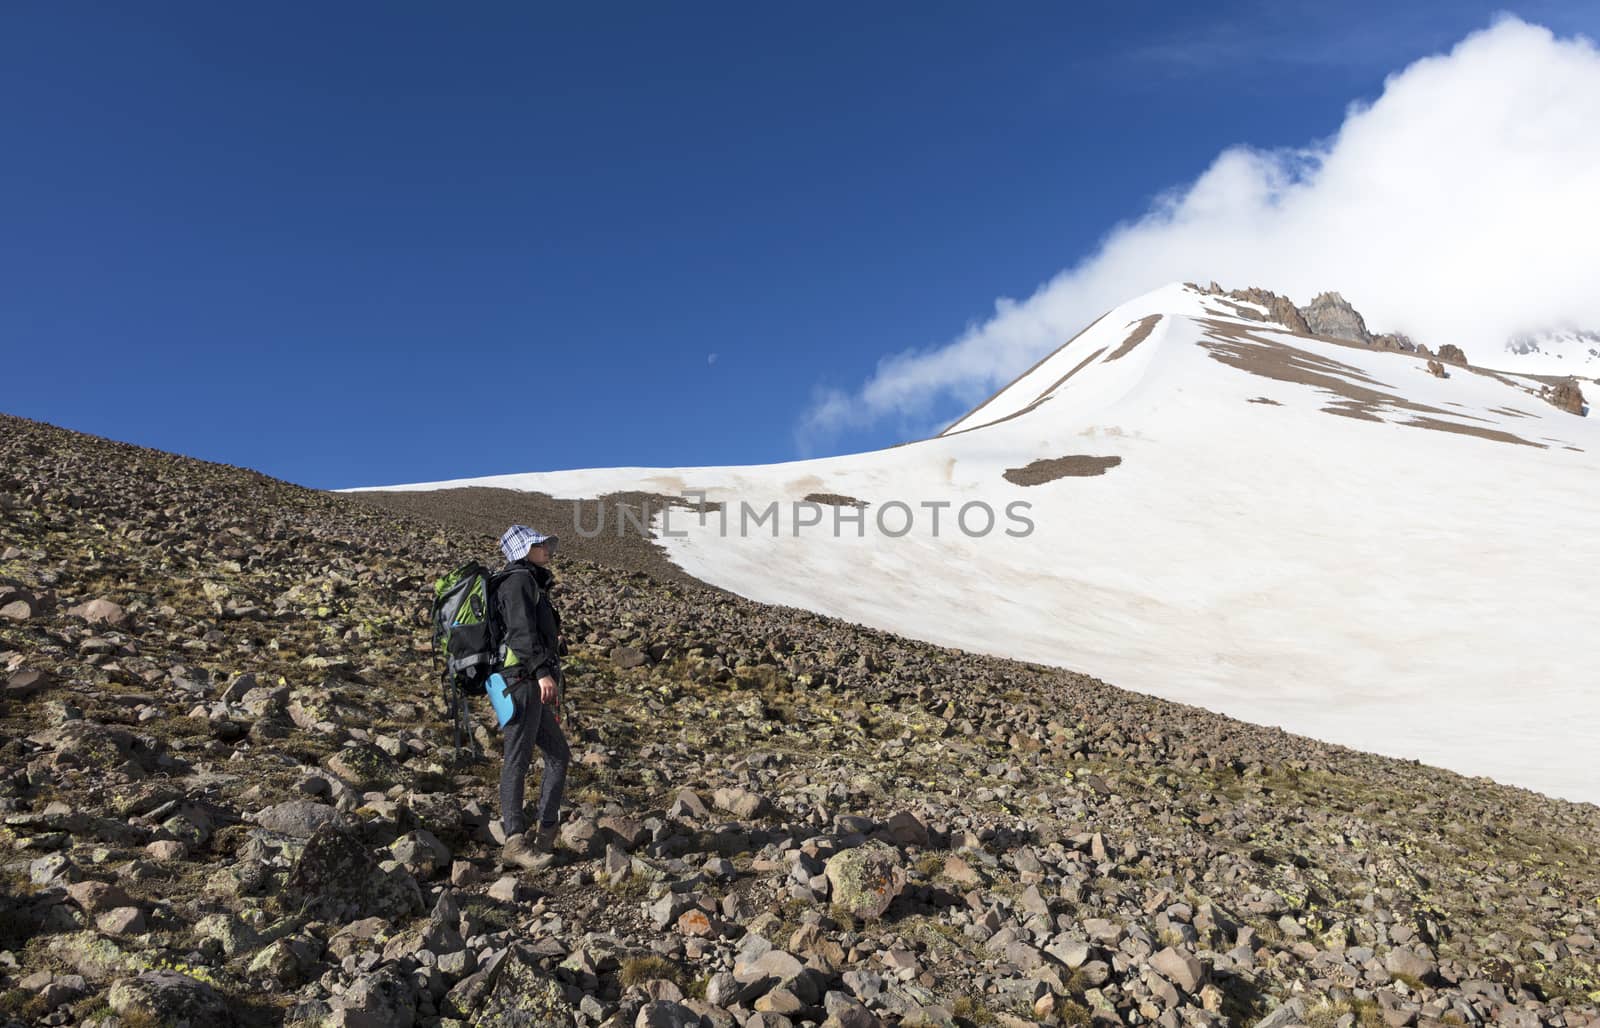 The tourist rises up the mountainside to the snow-capped summit by Sergii